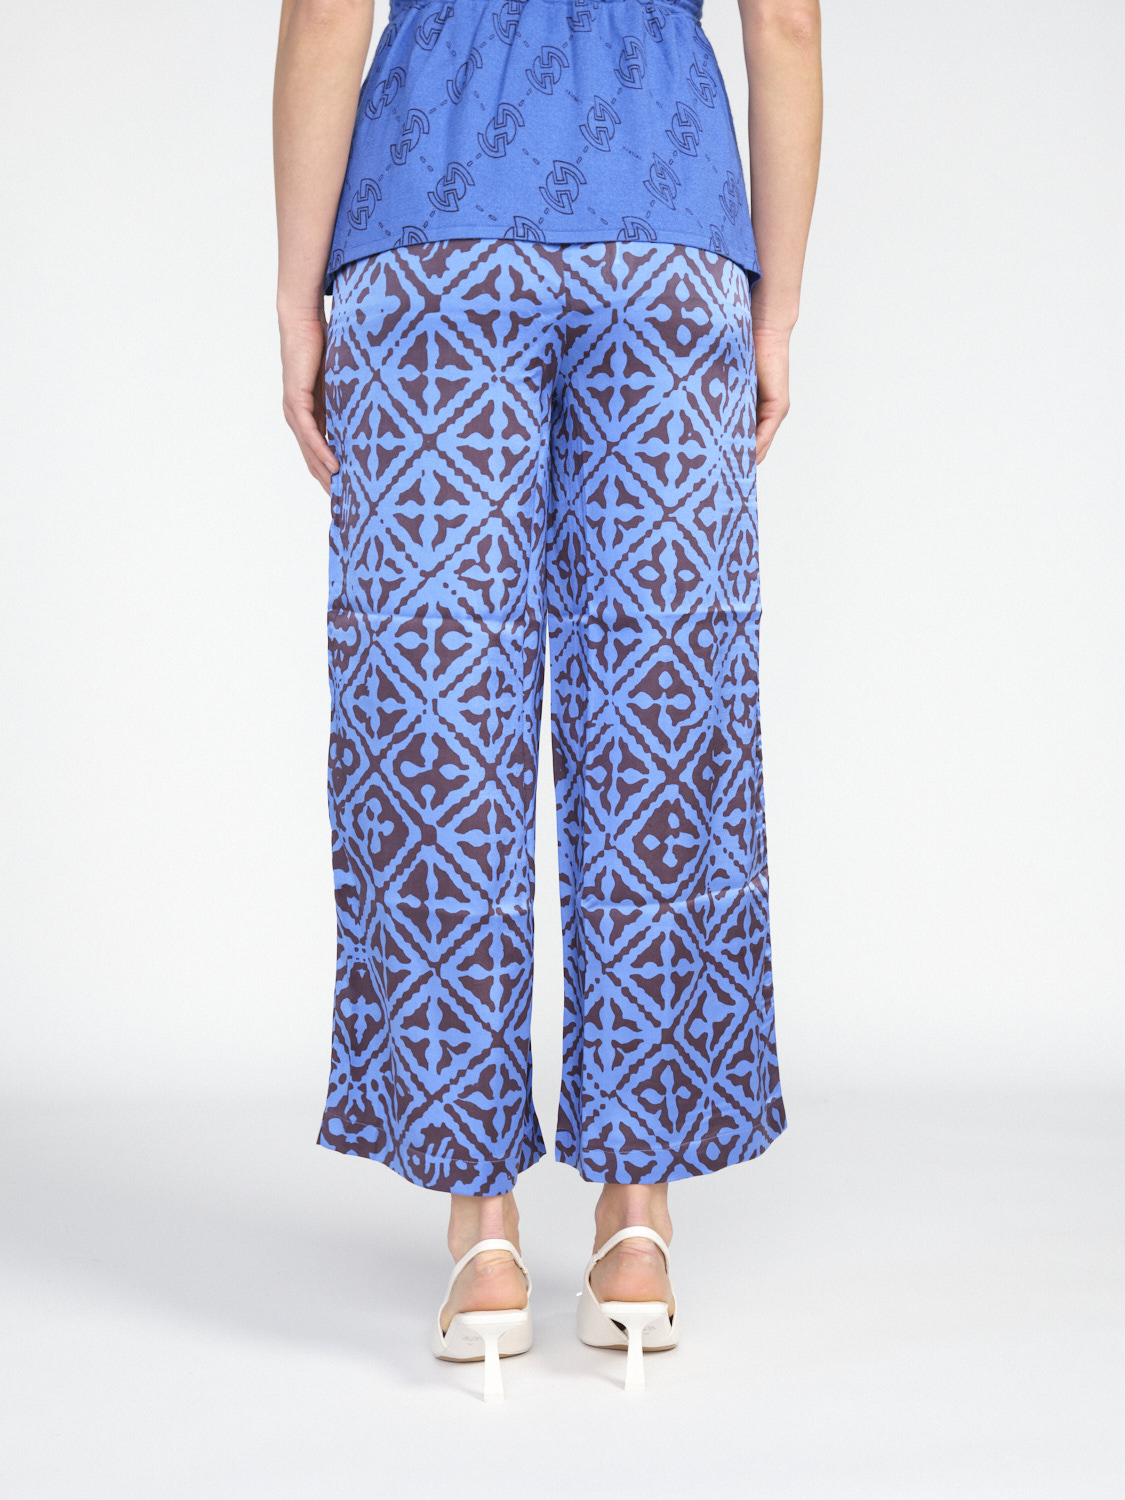 friendly hunting Baja – Stretchy silk trousers with a graphic pattern  blue S